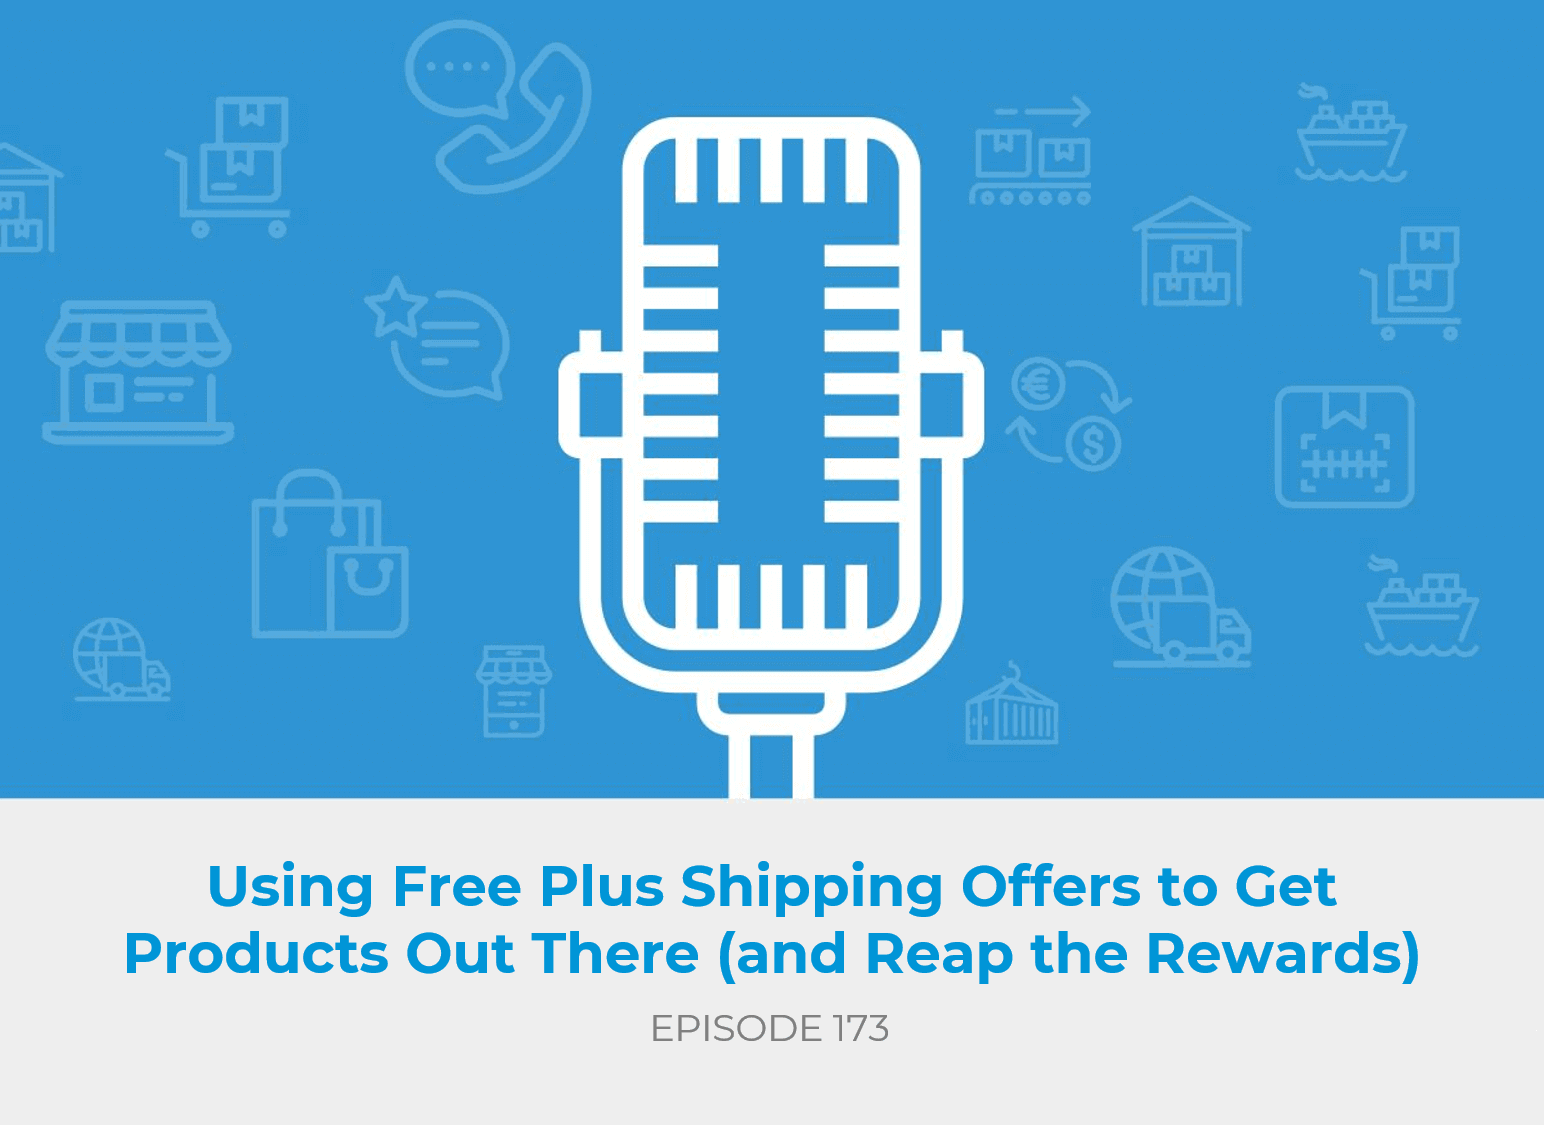 Using Free Plus Shipping Offers to Get Products Out There (And Reap the Rewards)